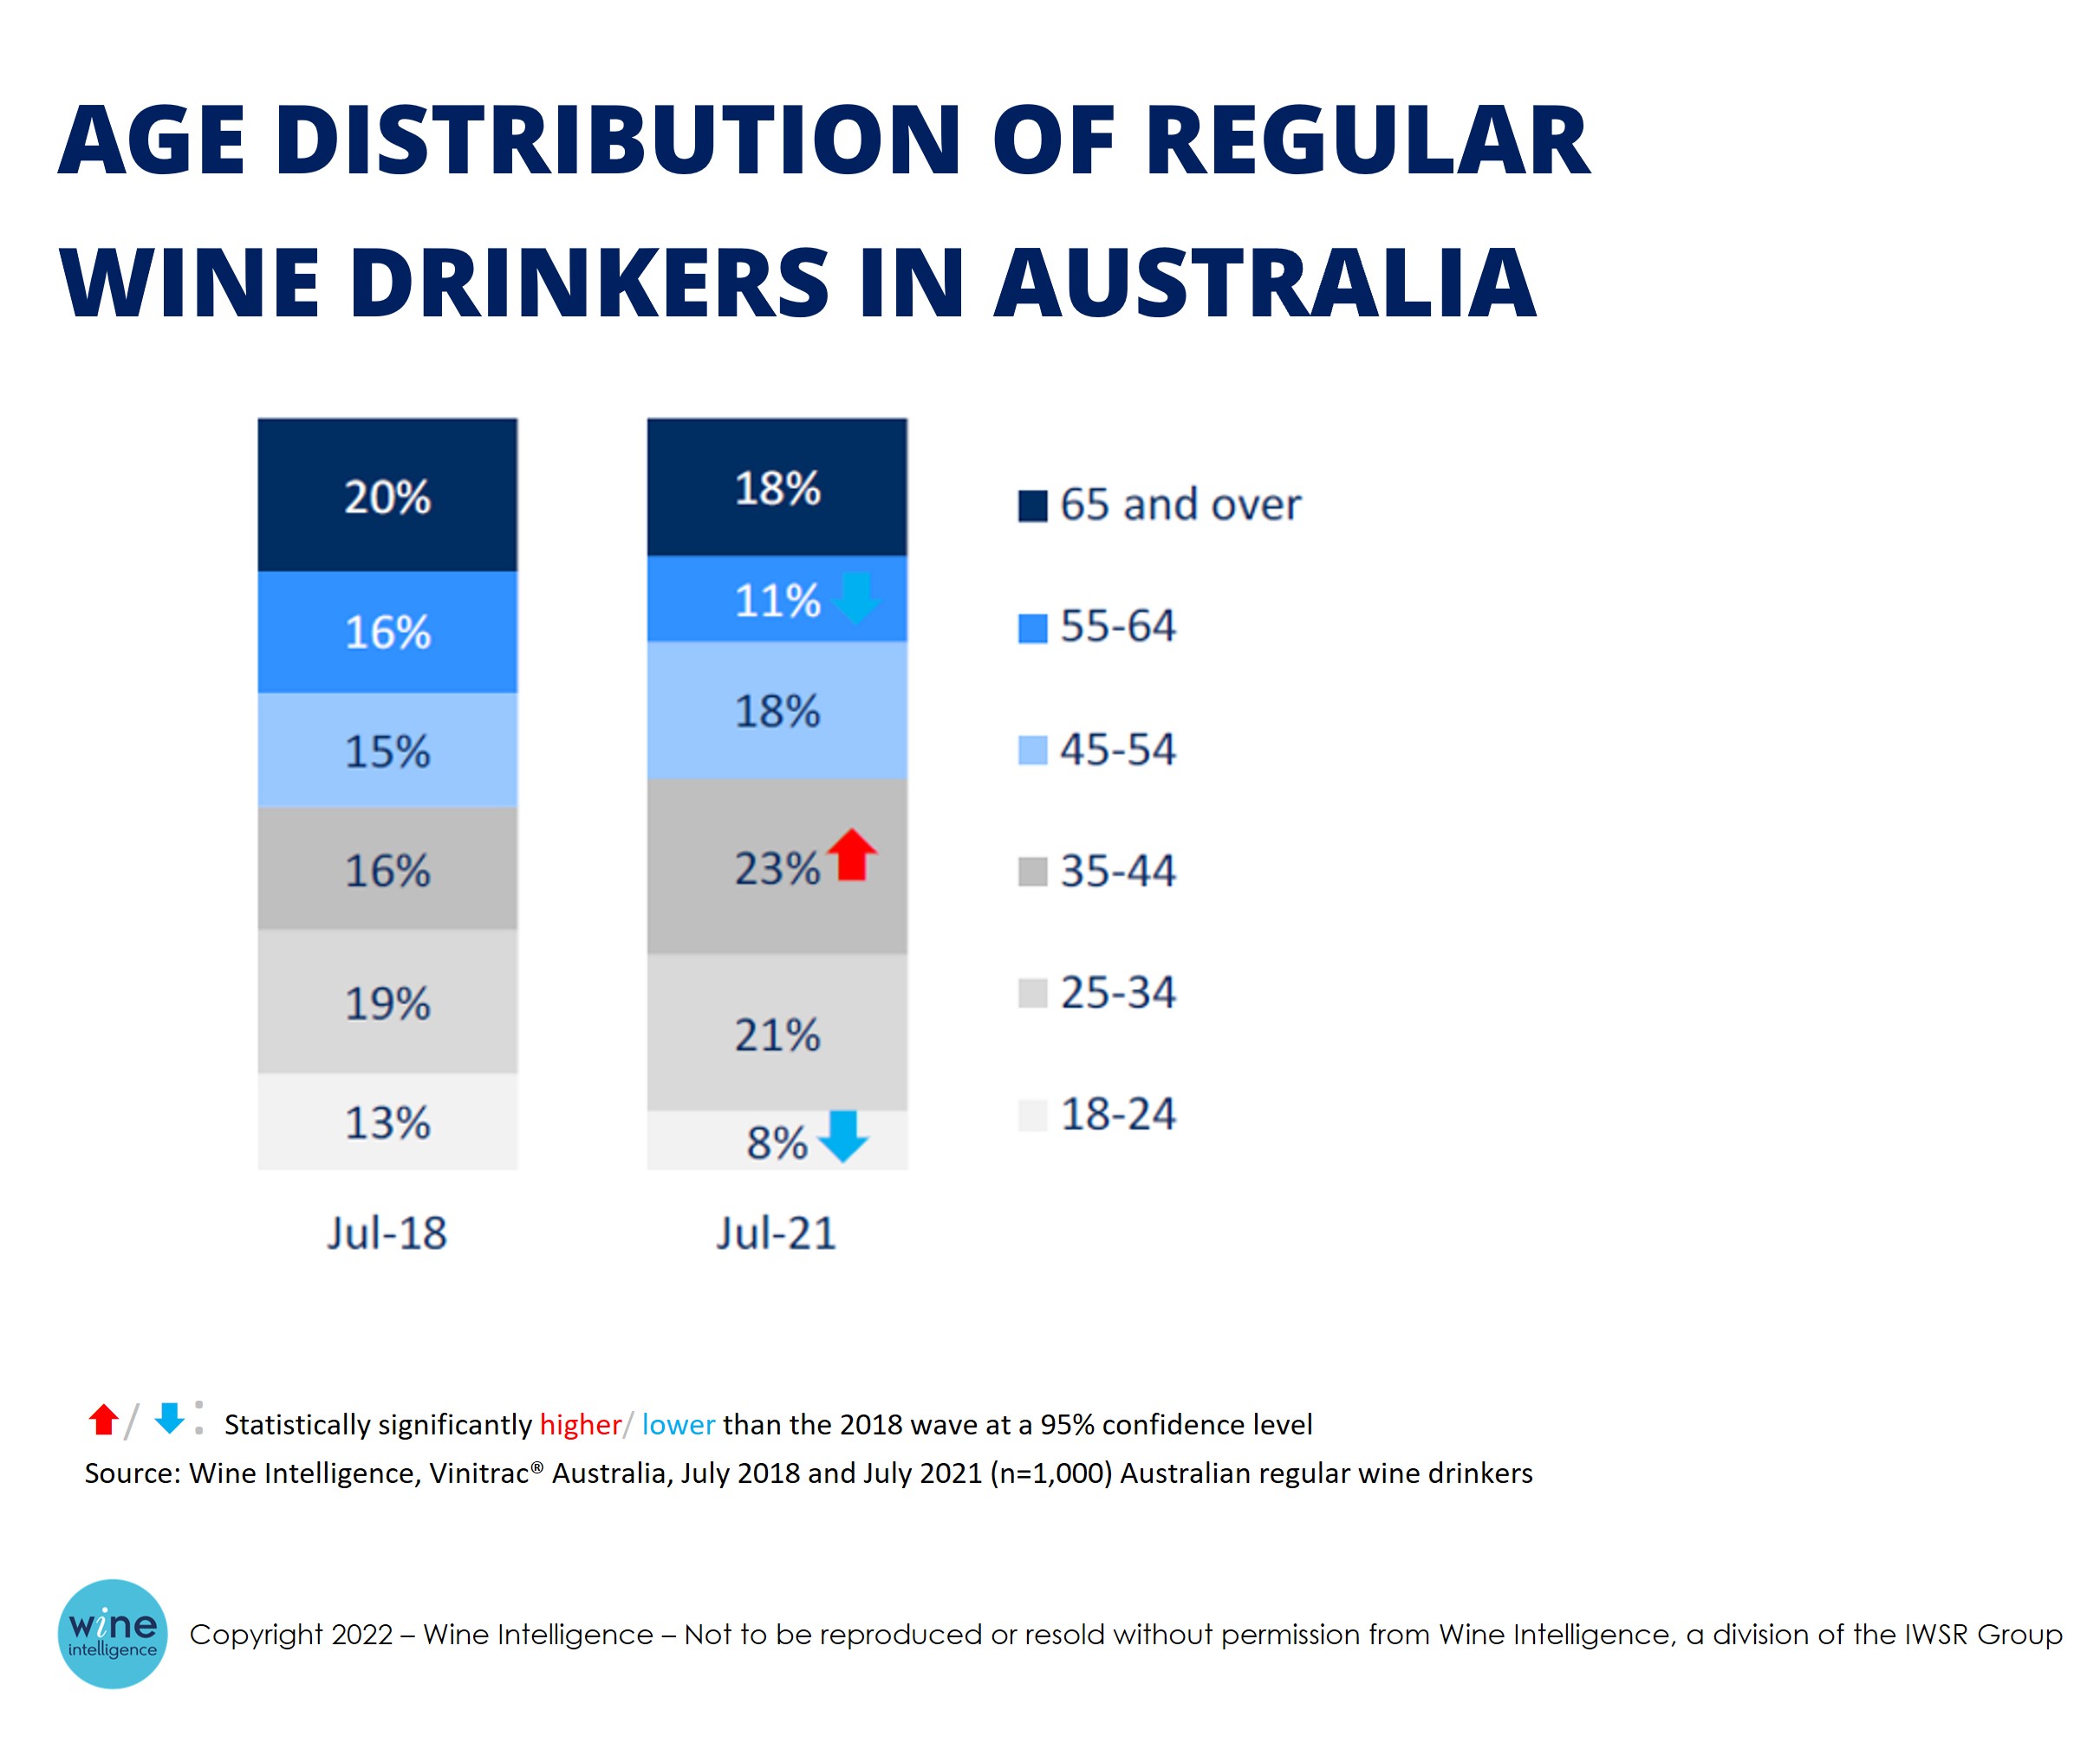 WI Chart Australia regular wine drinkers by age - What will happen to Australia’s new Millennial wine drinkers in 2022?